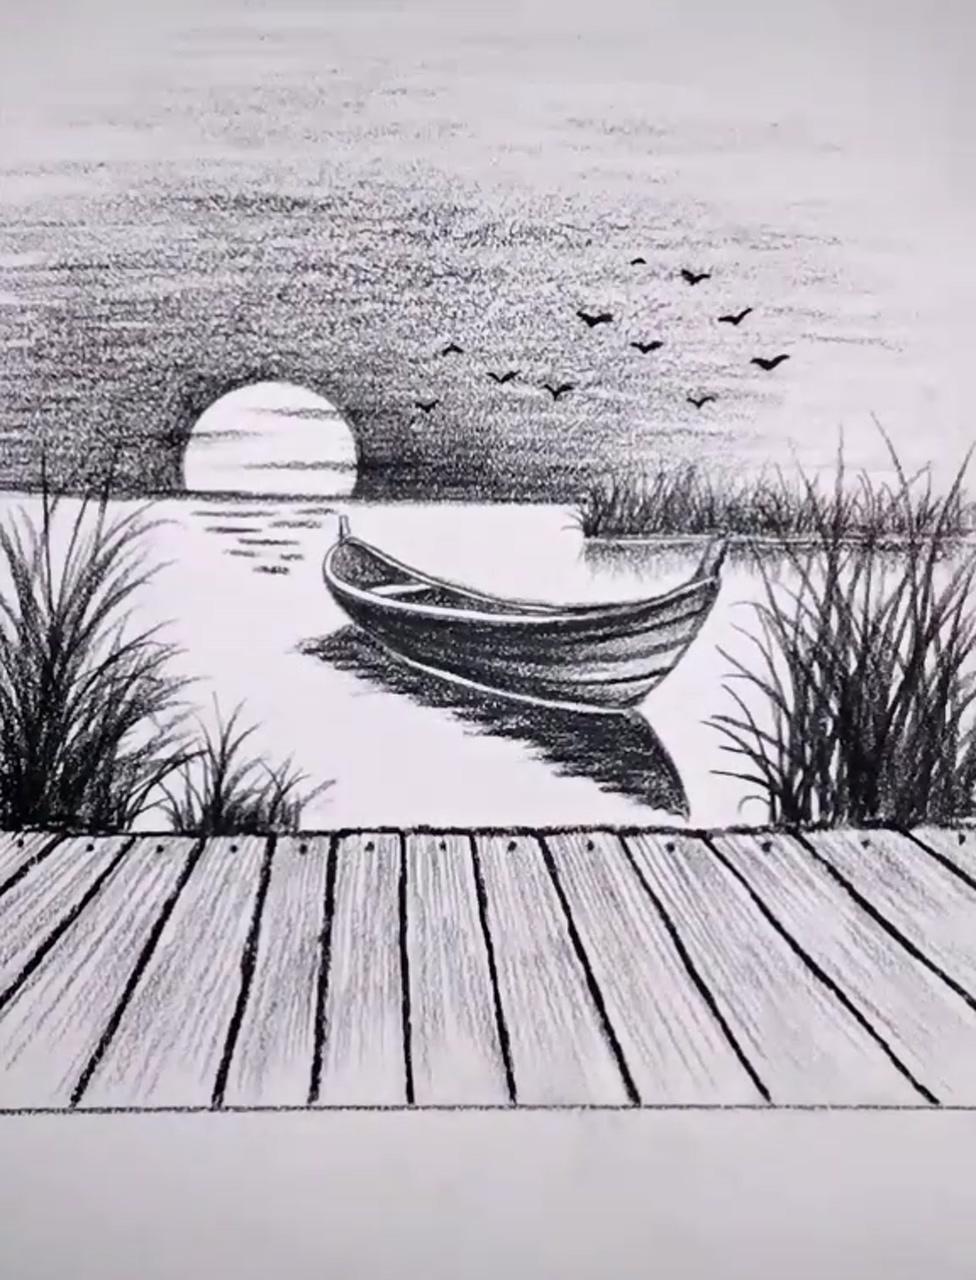 The beautiful melody, coupled with the quiet picture; landscape pencil drawings